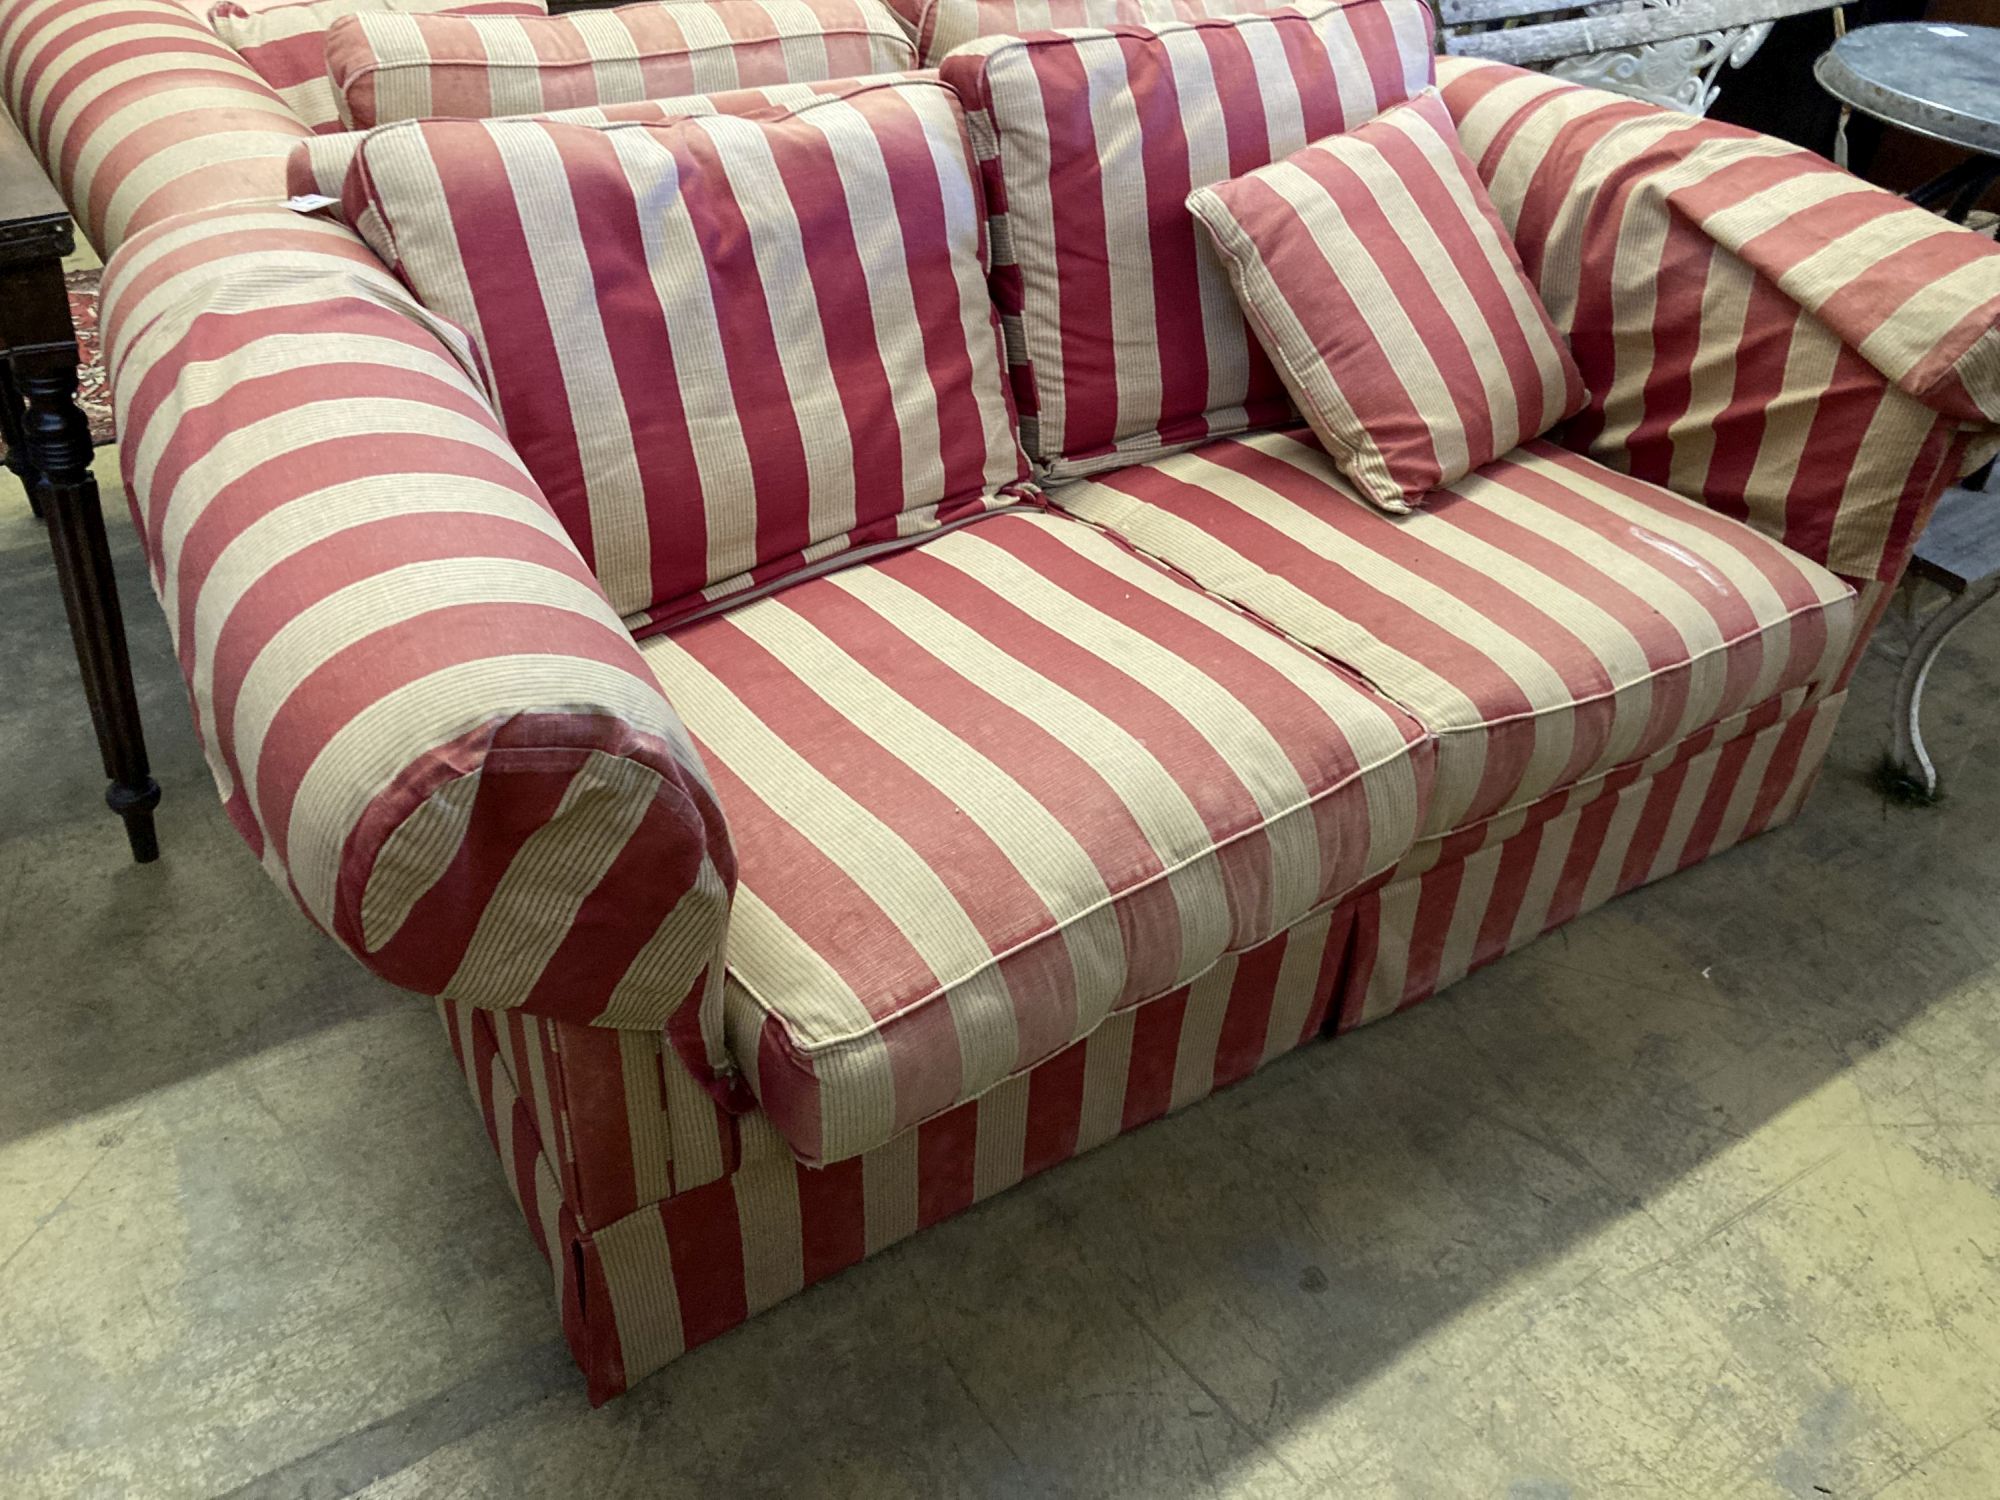 A pair of modern Chesterfied settees with red and cream upholstery (upholstery worn), length 178cm, depth 100cm, height 72cm